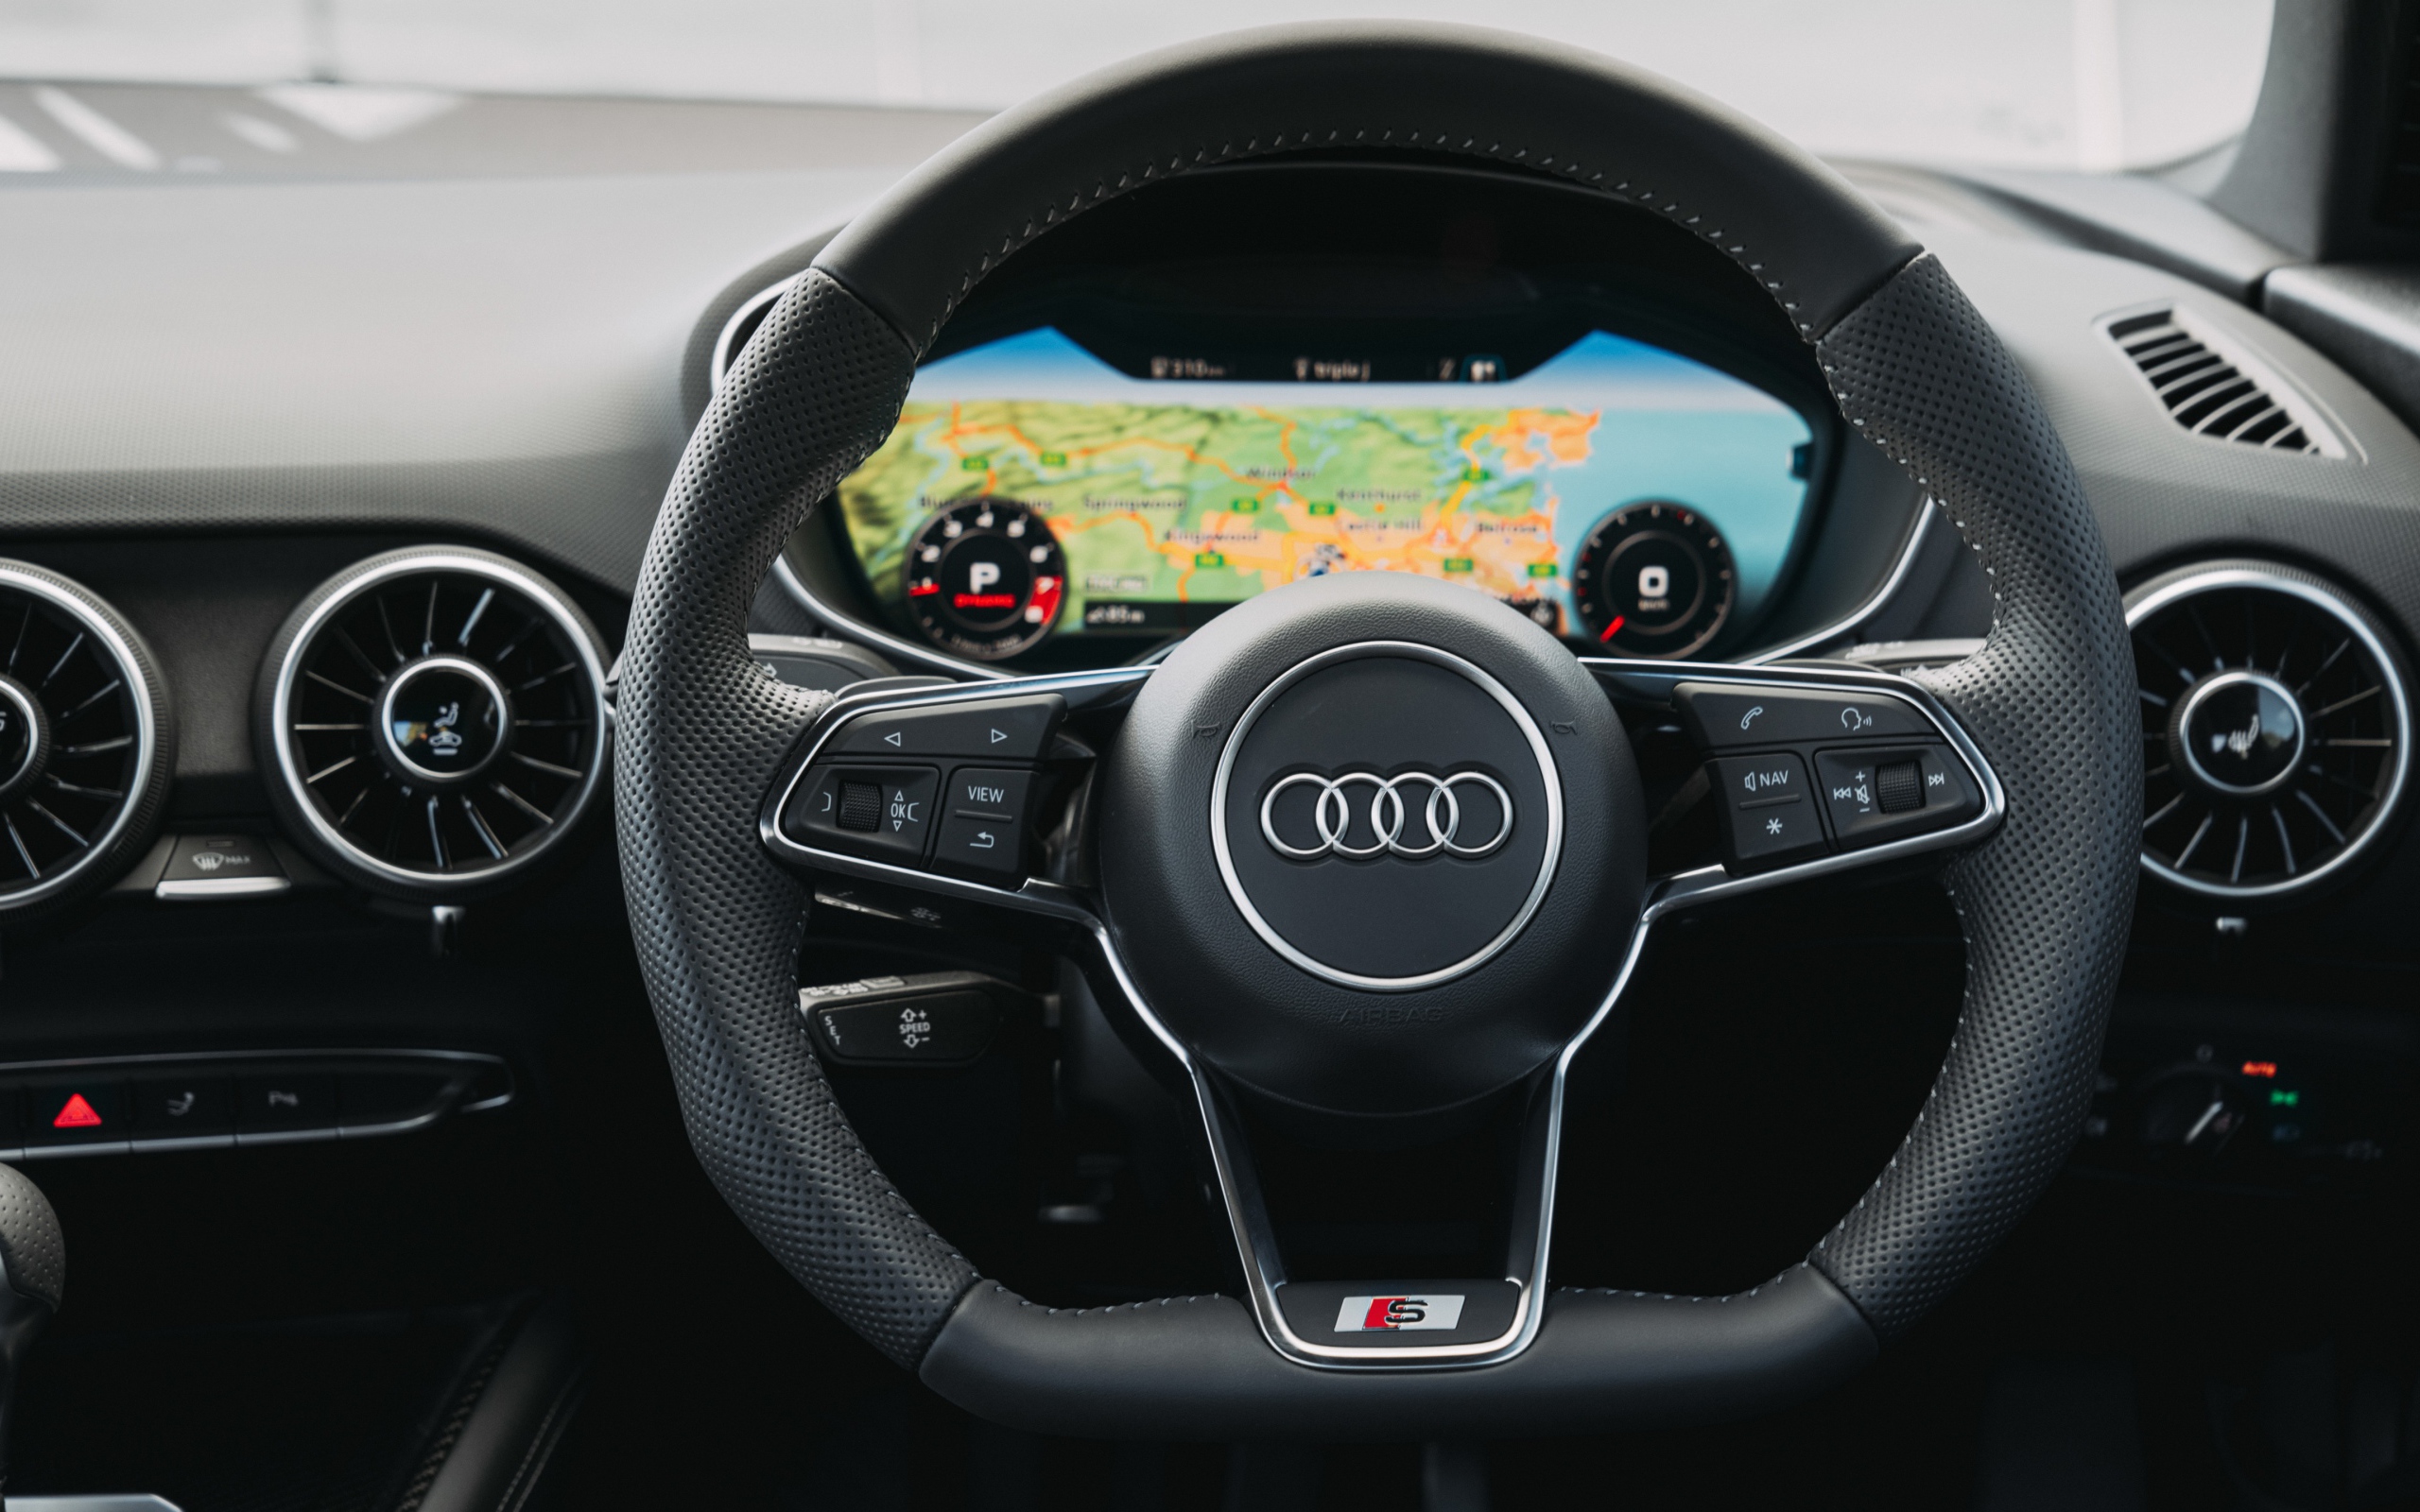 Leather steering wheel of the 2019 Audi TTS Coupe